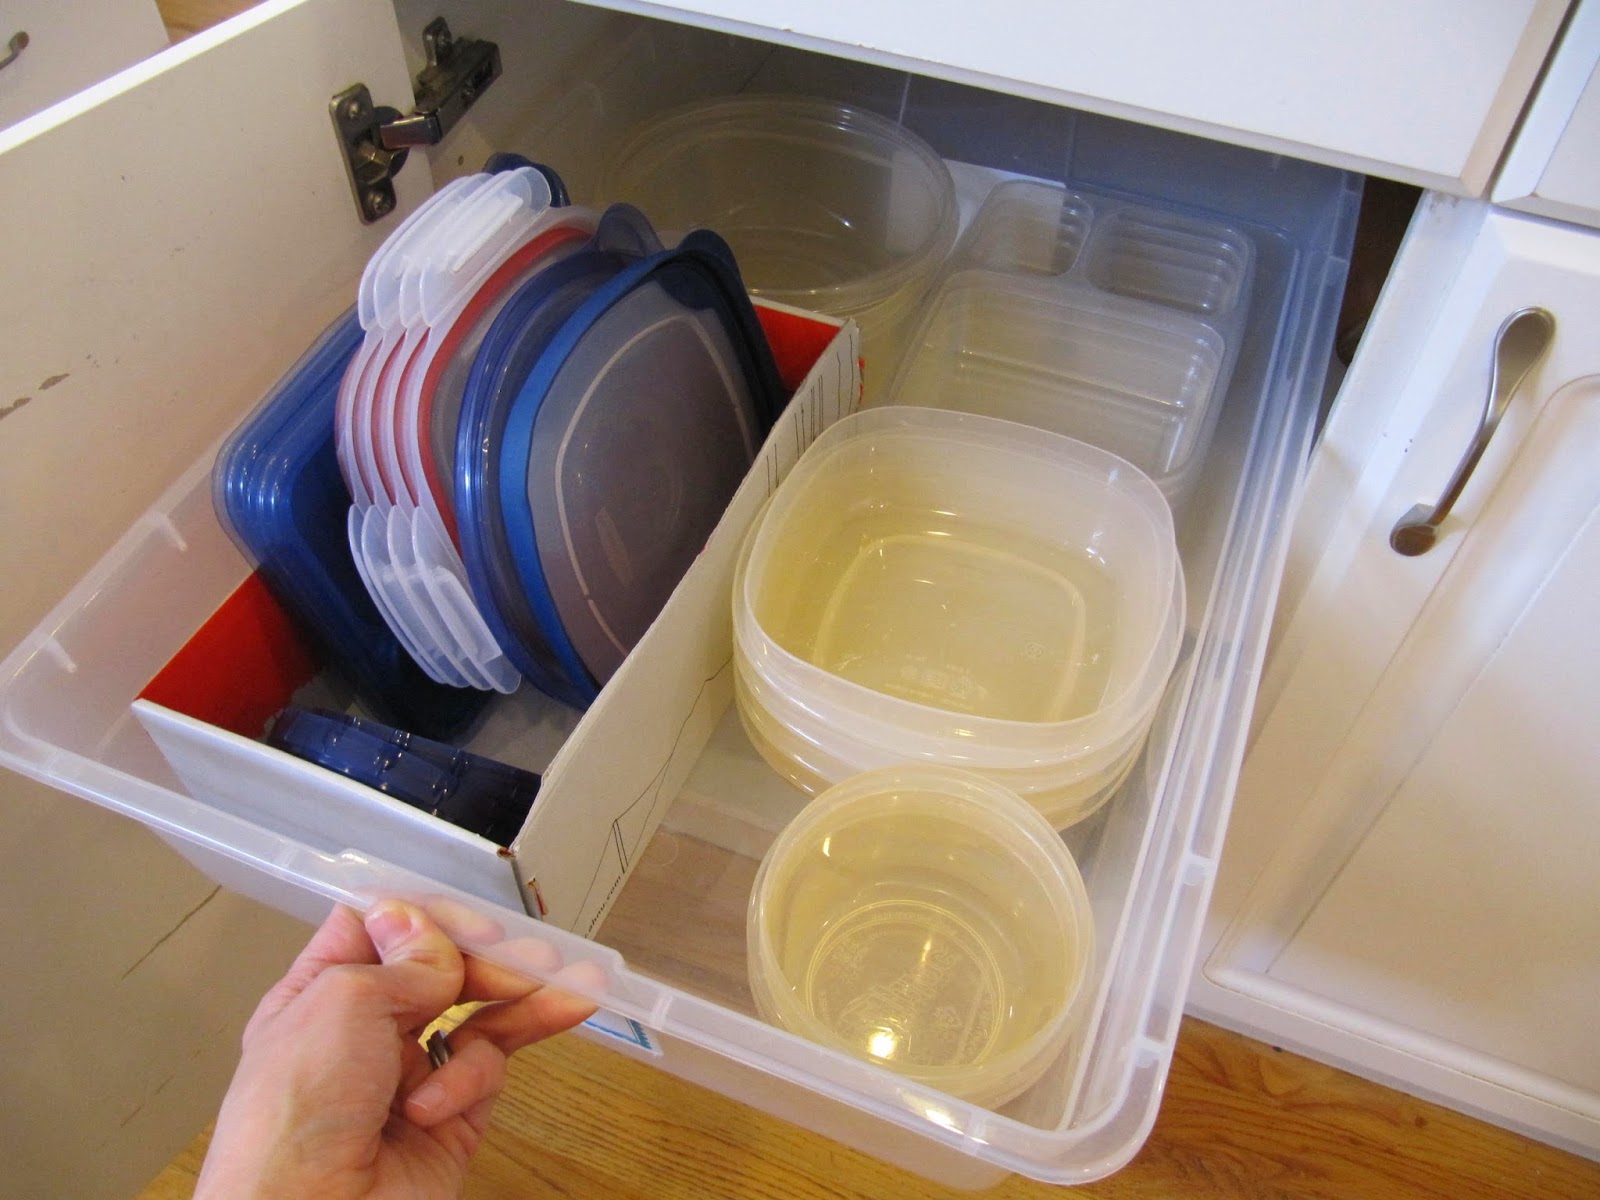 Organizing Plastic Ware: A Step-by-Step Guide